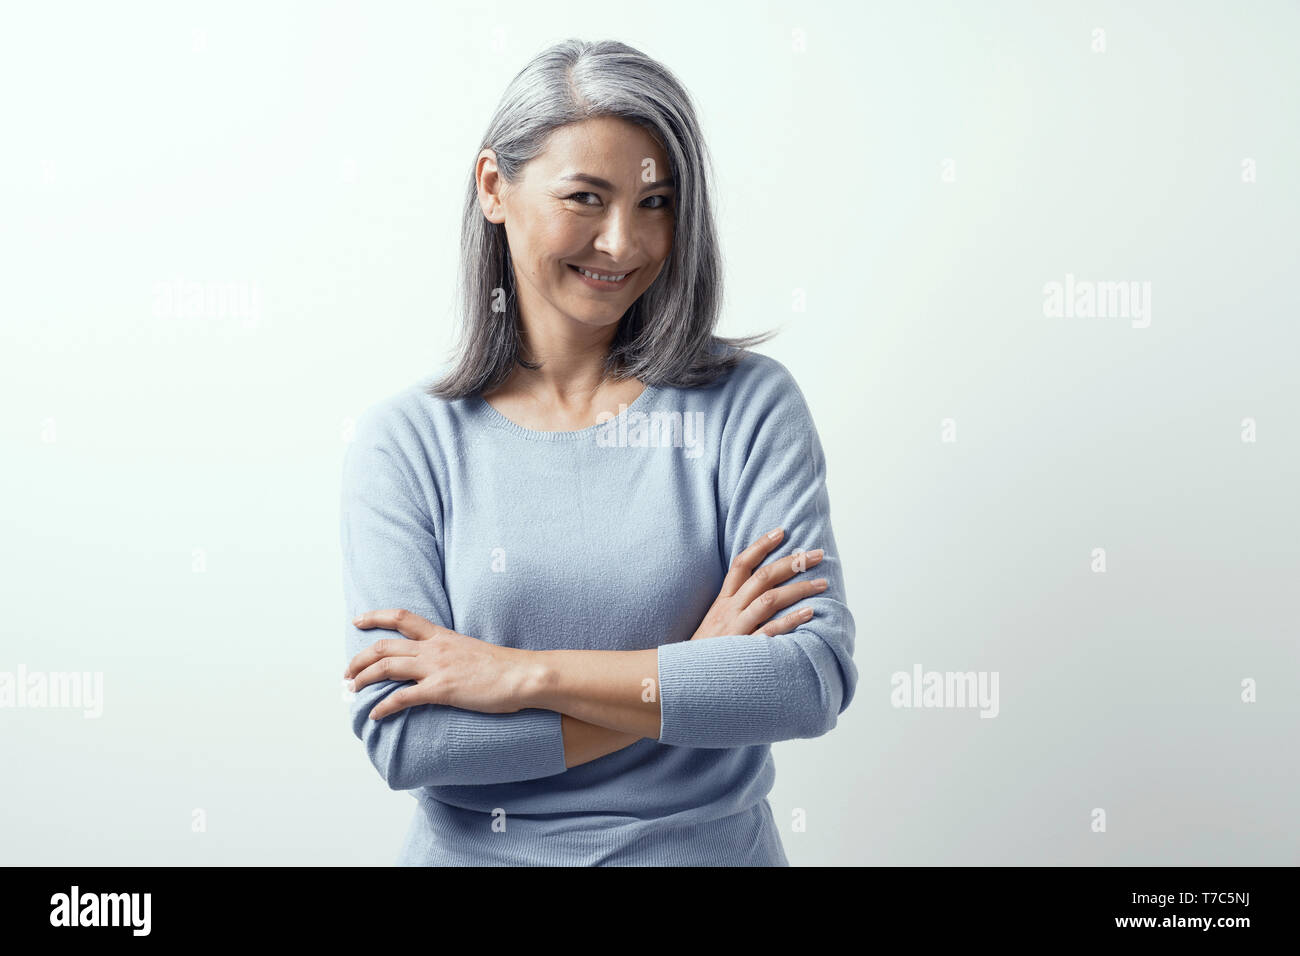 Charming Asian Middle-Aged Model with Dark Skin Posing on a White Background in Studio Smiling. Her Head Tilted Coquettishly. She Wears Blue Sweater. Stock Photo